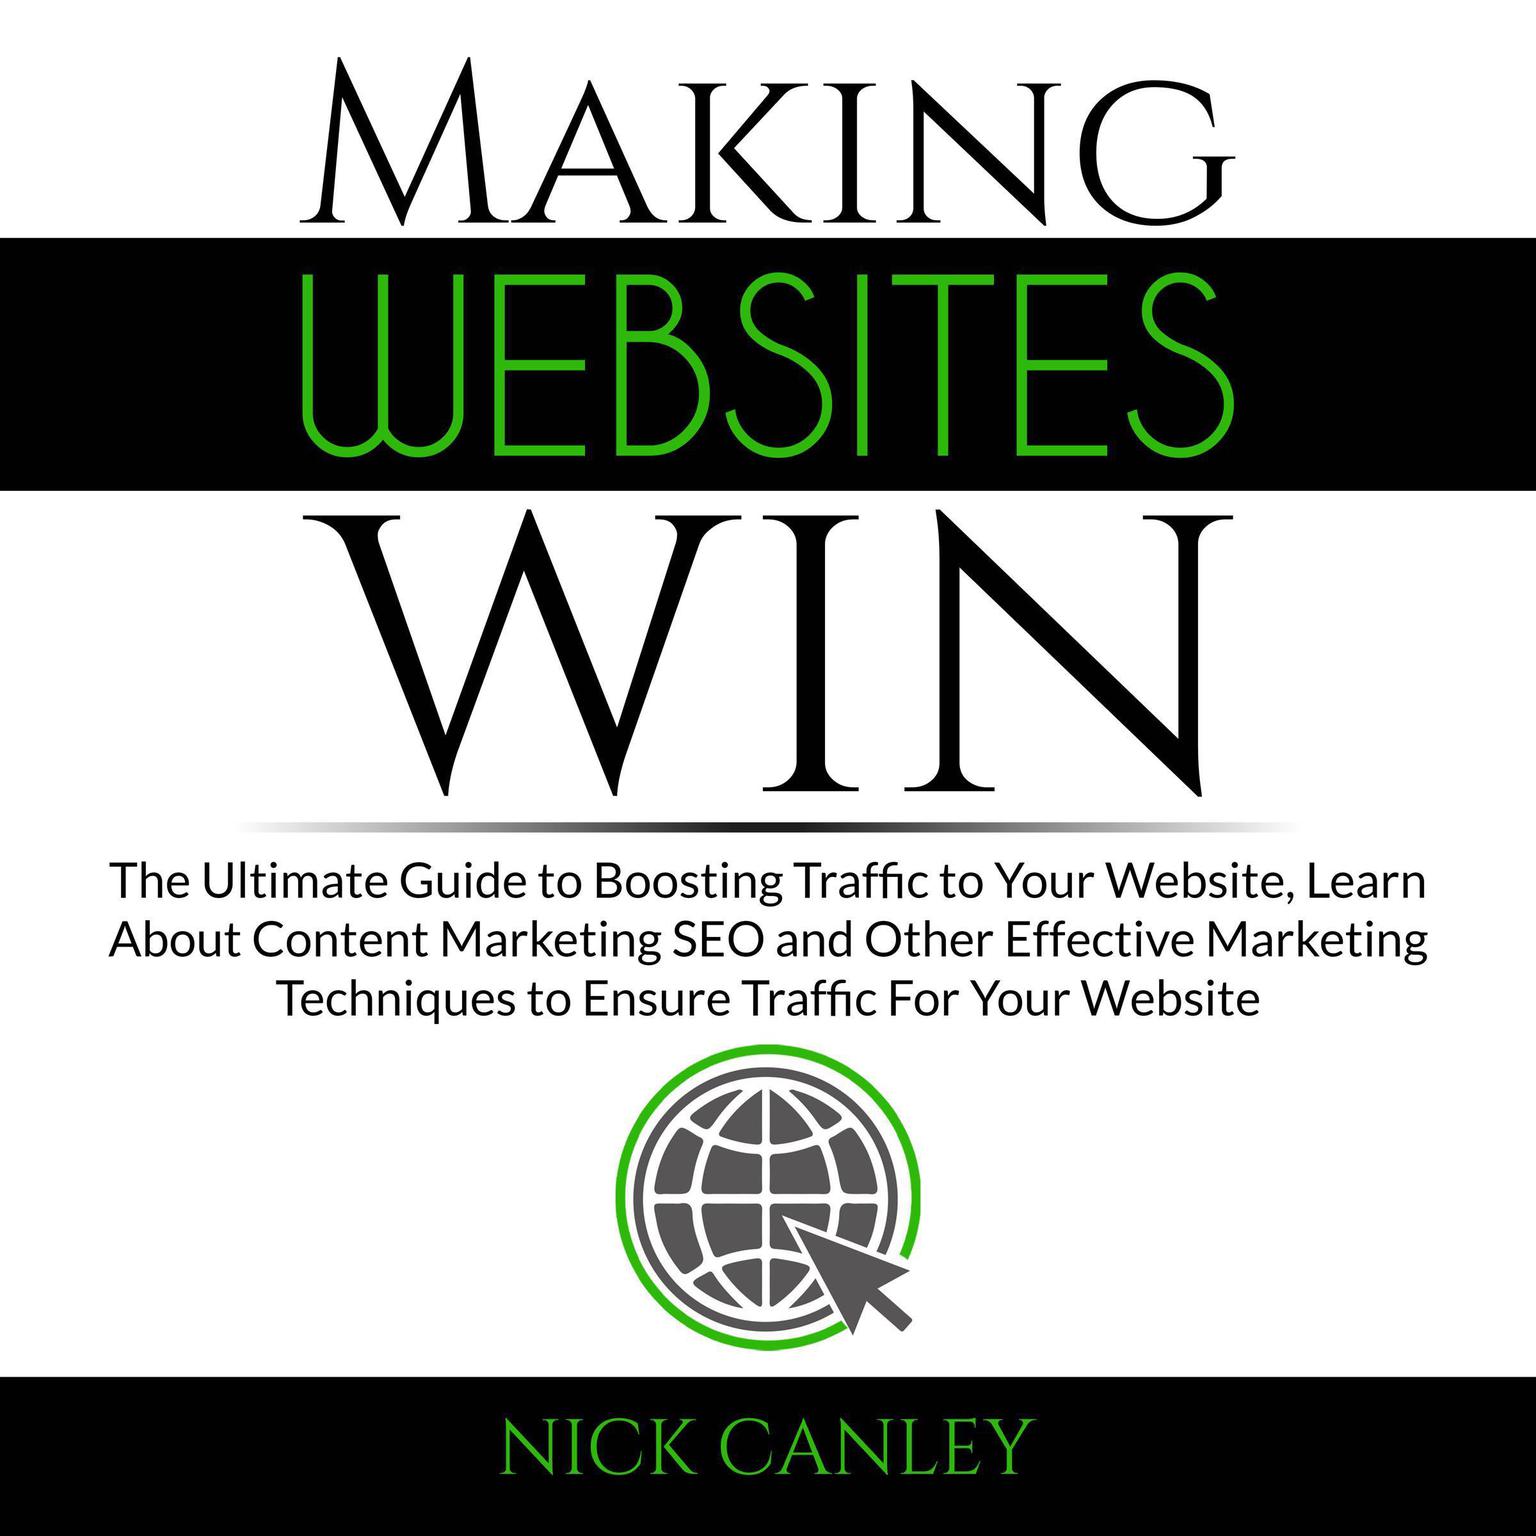 Making Websites Win: The Ultimate Guide to Boosting Traffic to Your Website, Learn About Content Marketing SEO and Other Effective Marketing Techniques to Ensure Traffic For Your Website Audiobook, by Nick Canley